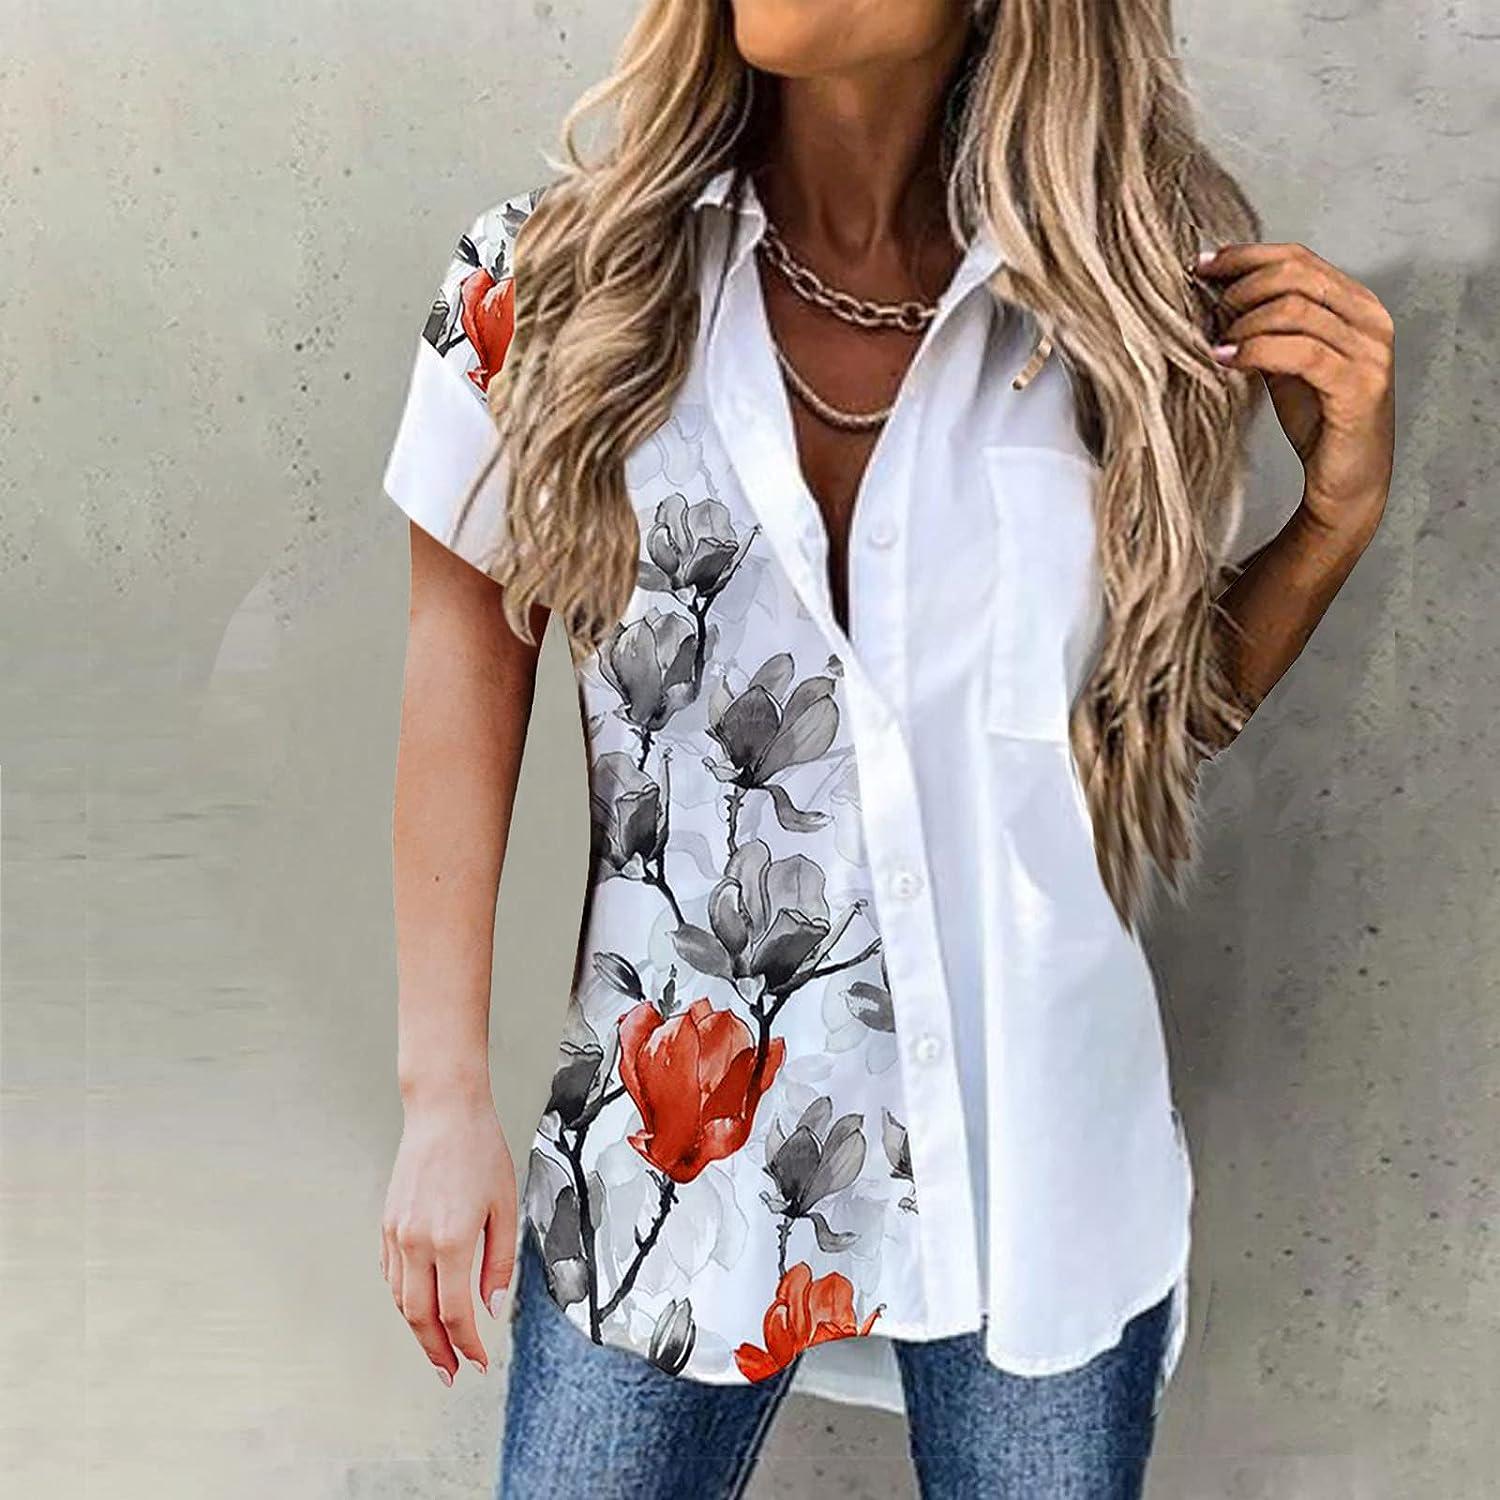 Ganfancp Women's Cardigan Top Summer Button Down Lapel Short Sleeve Shirts  Outwear Floral Print Lightweight Loose Fit Blouse White-64 XX-Large